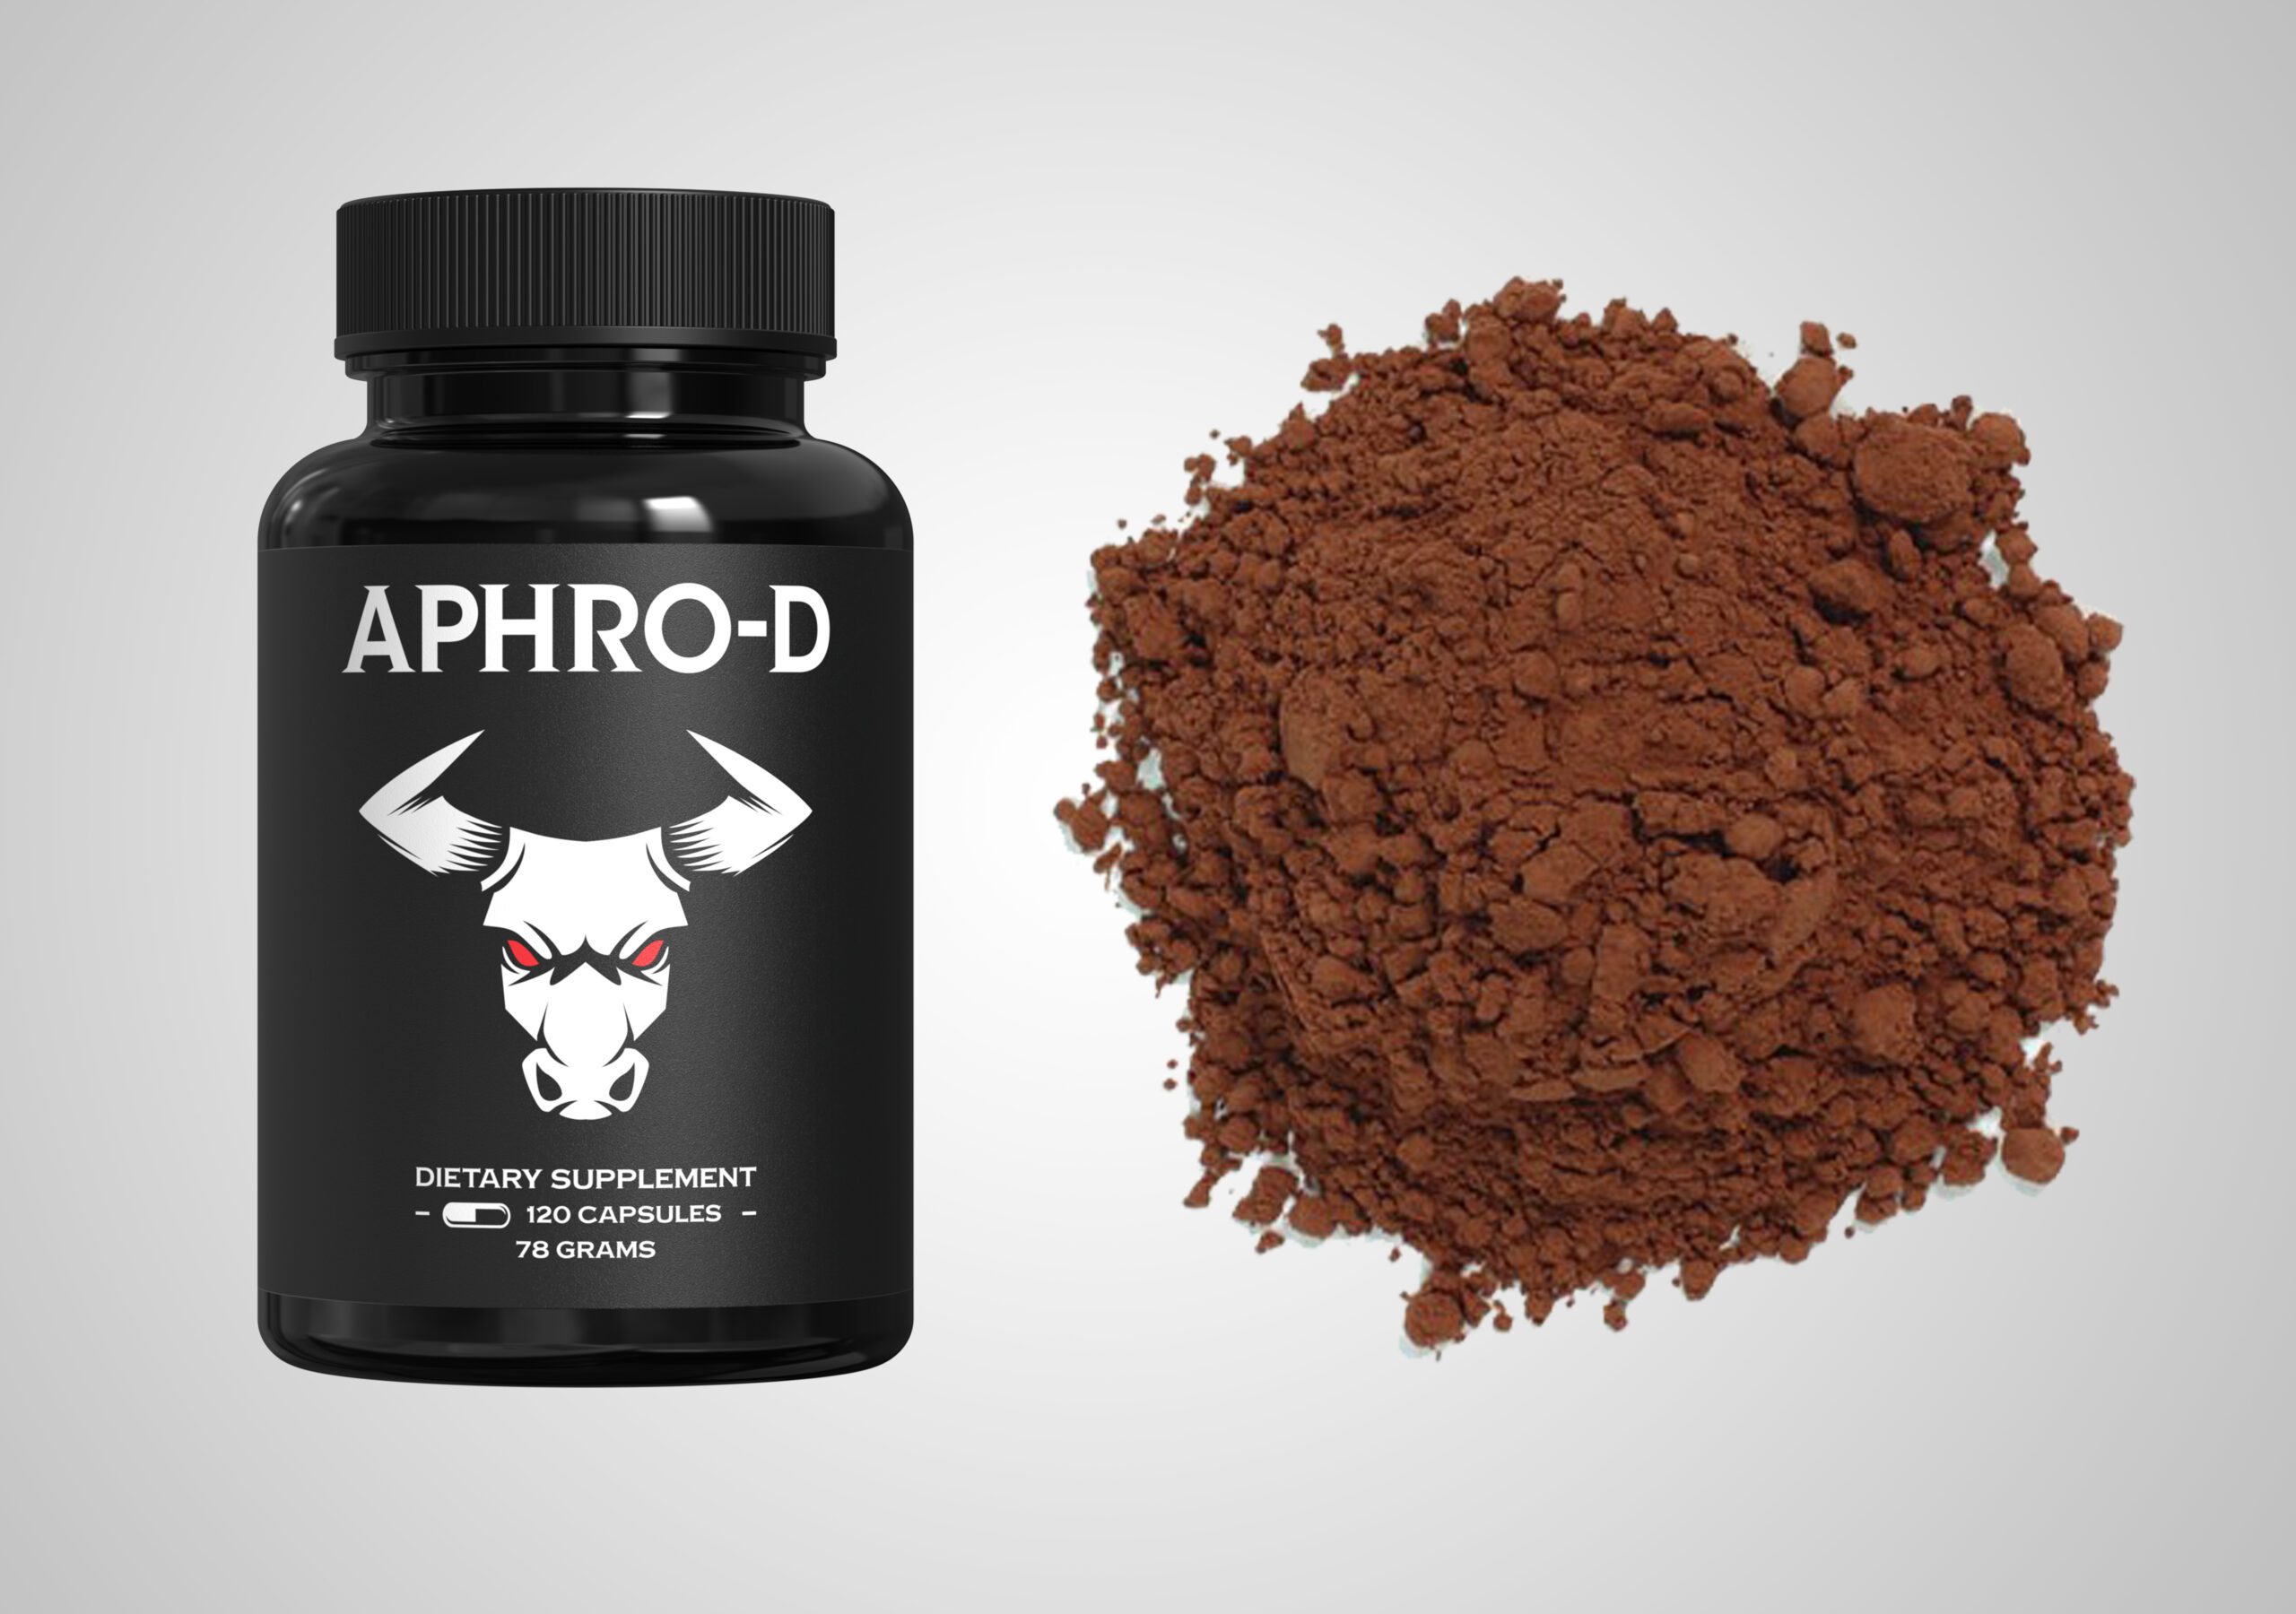 What is Aphro-D Powder?